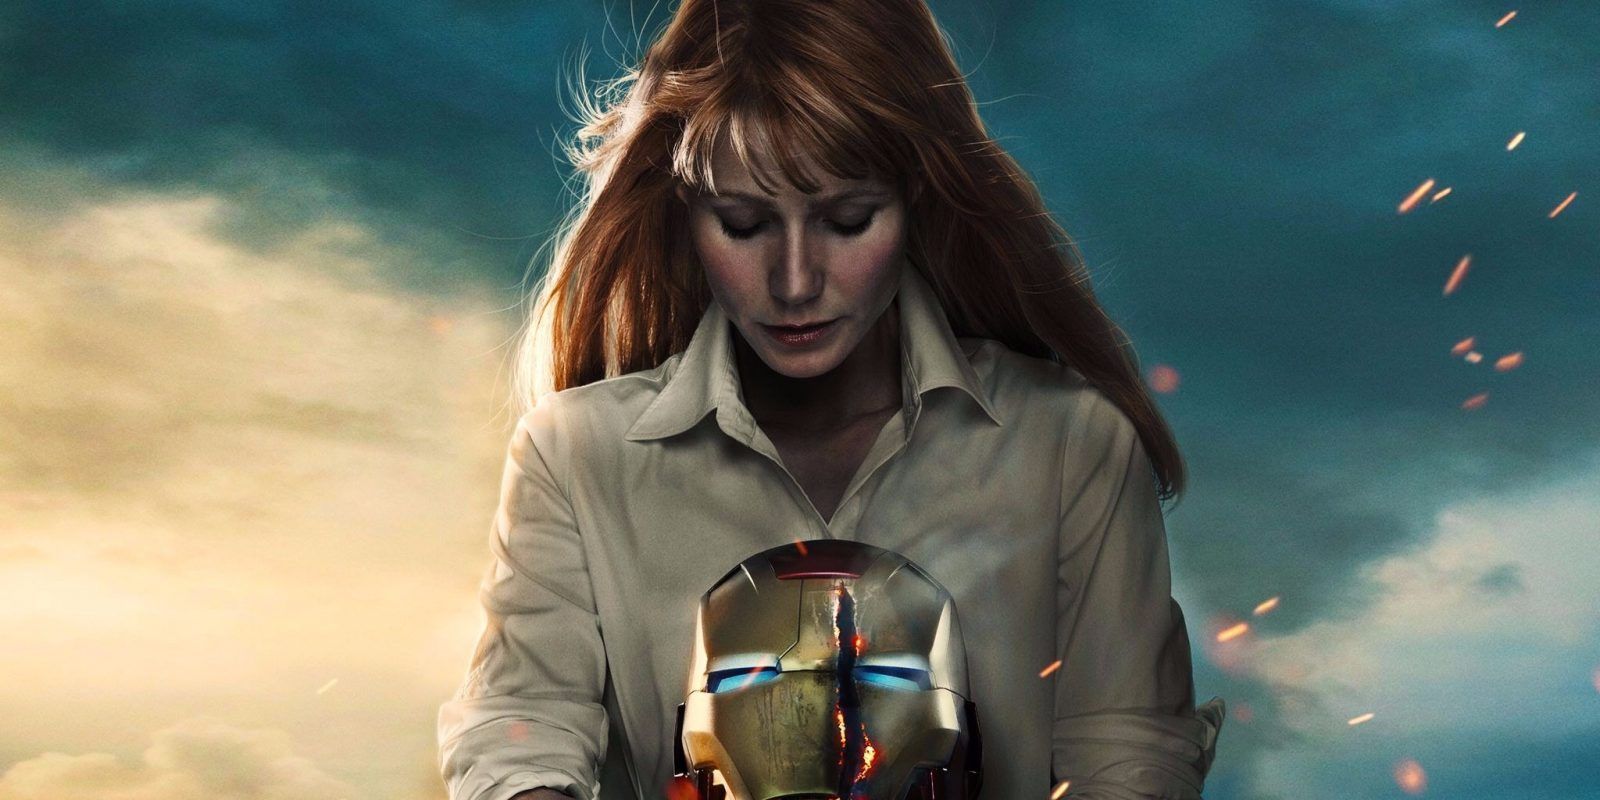 Pepper Potts May Have Powers In Avengers: Infinity War